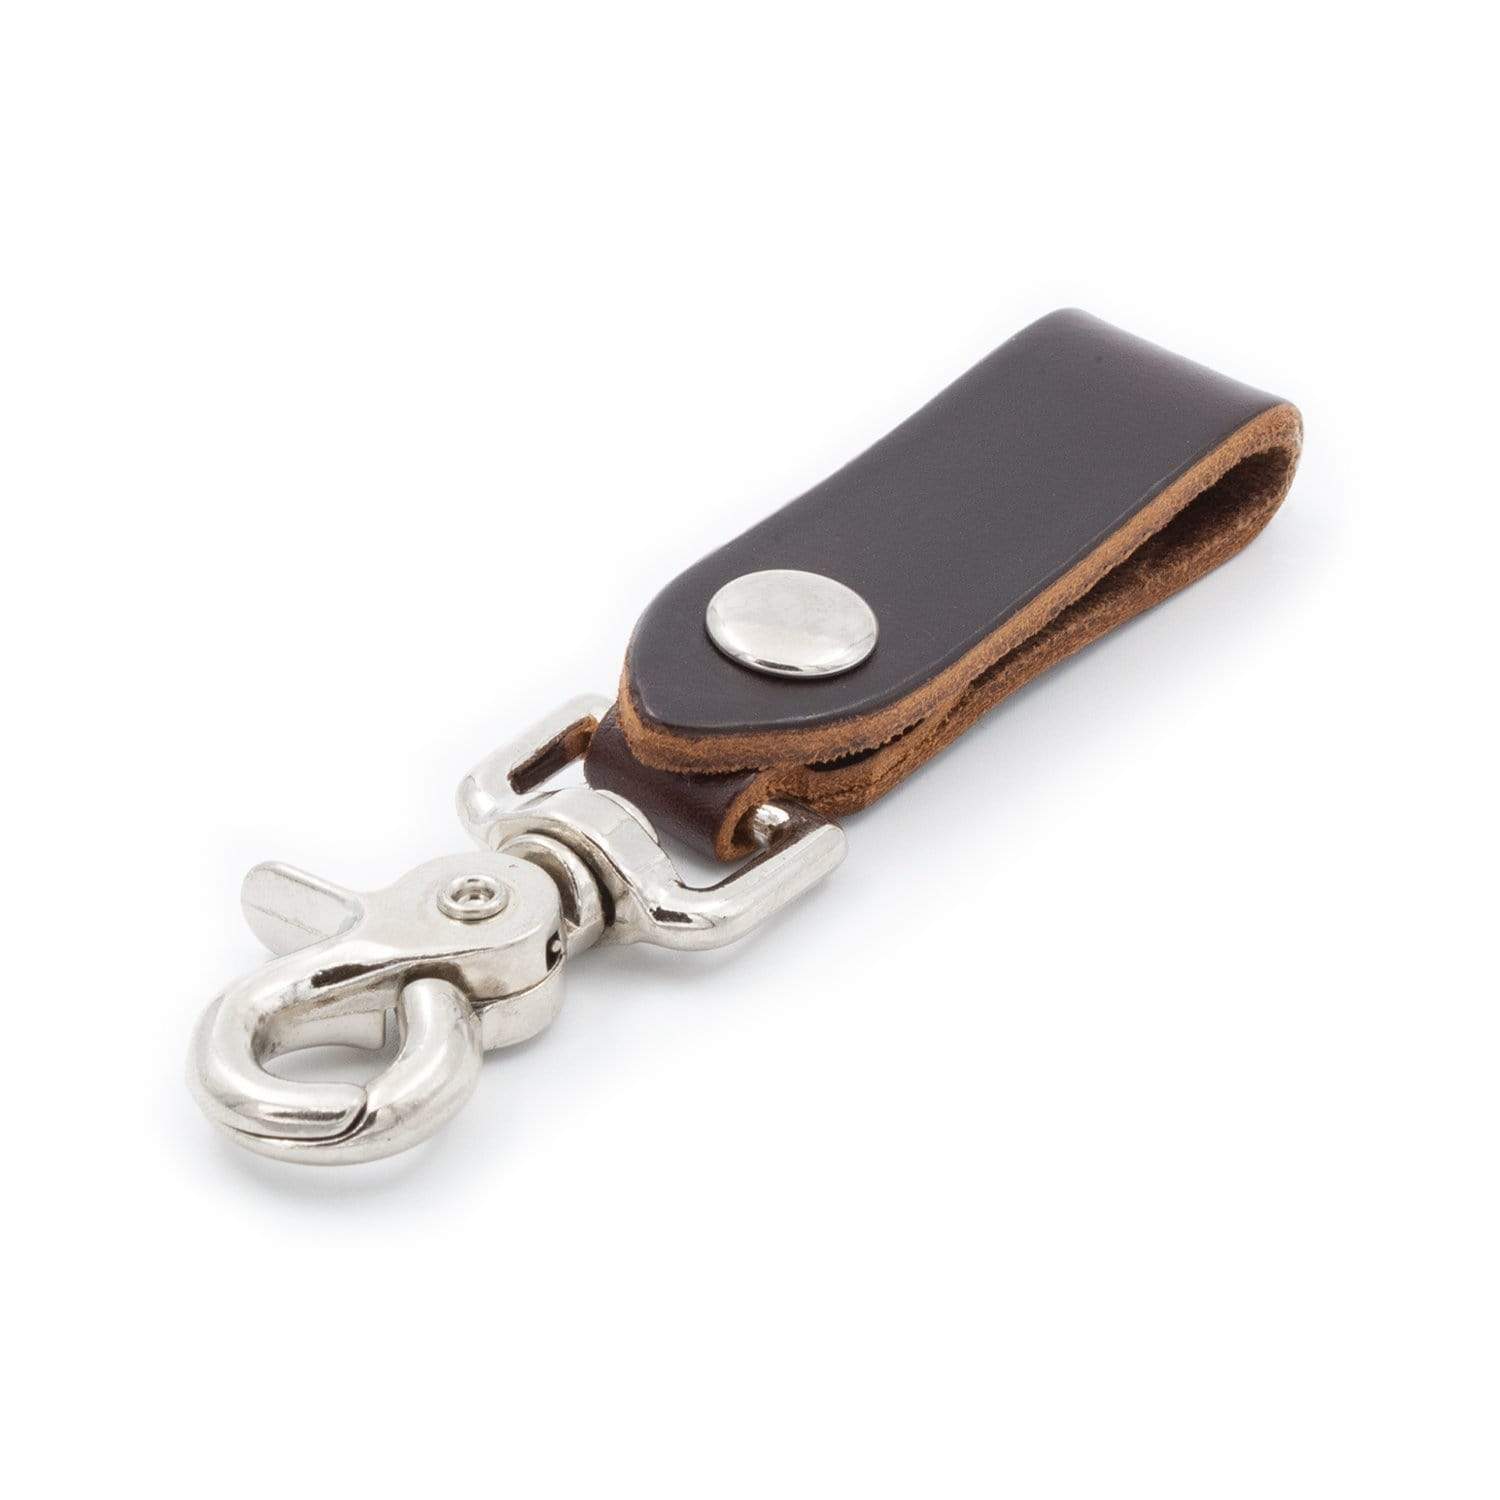 Nosiny 100 Pcs PU Leather Key Fob Kit 10 Colors Leather Keychain Blanks with Key Rings and Rivets Key Chains Bulk for DIY